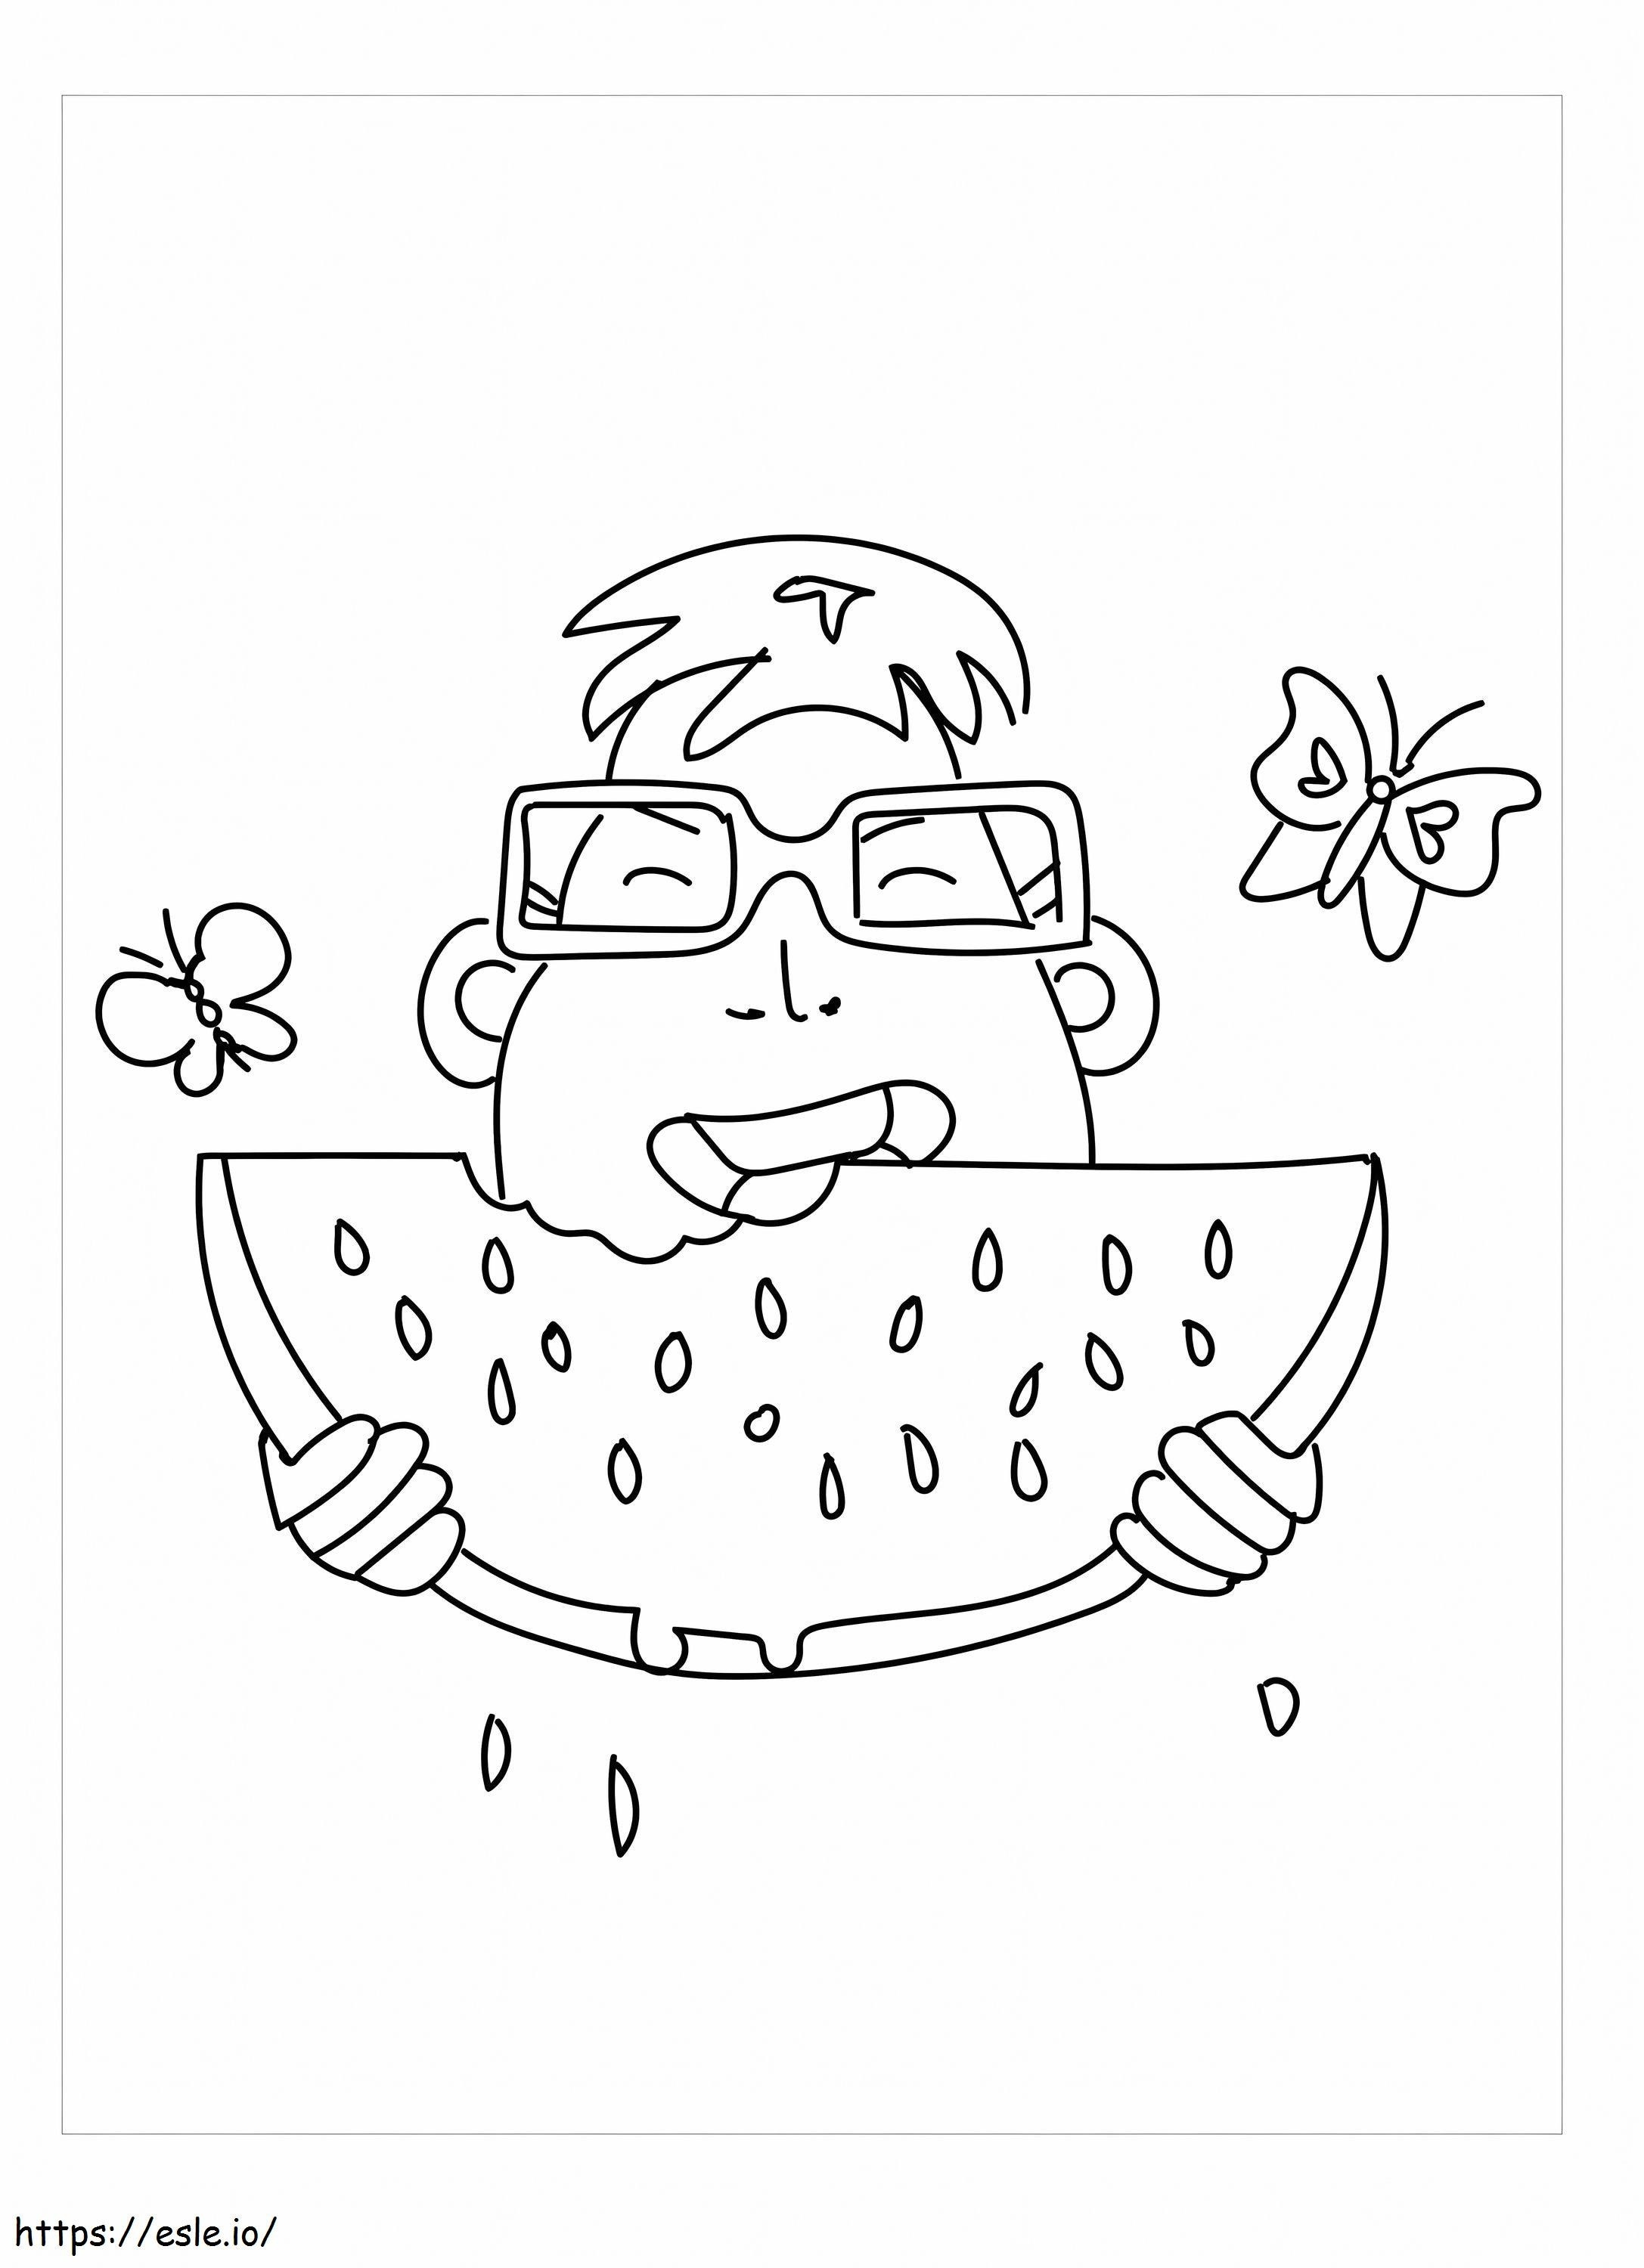 Boy Eating Watermelon With Butterflies coloring page